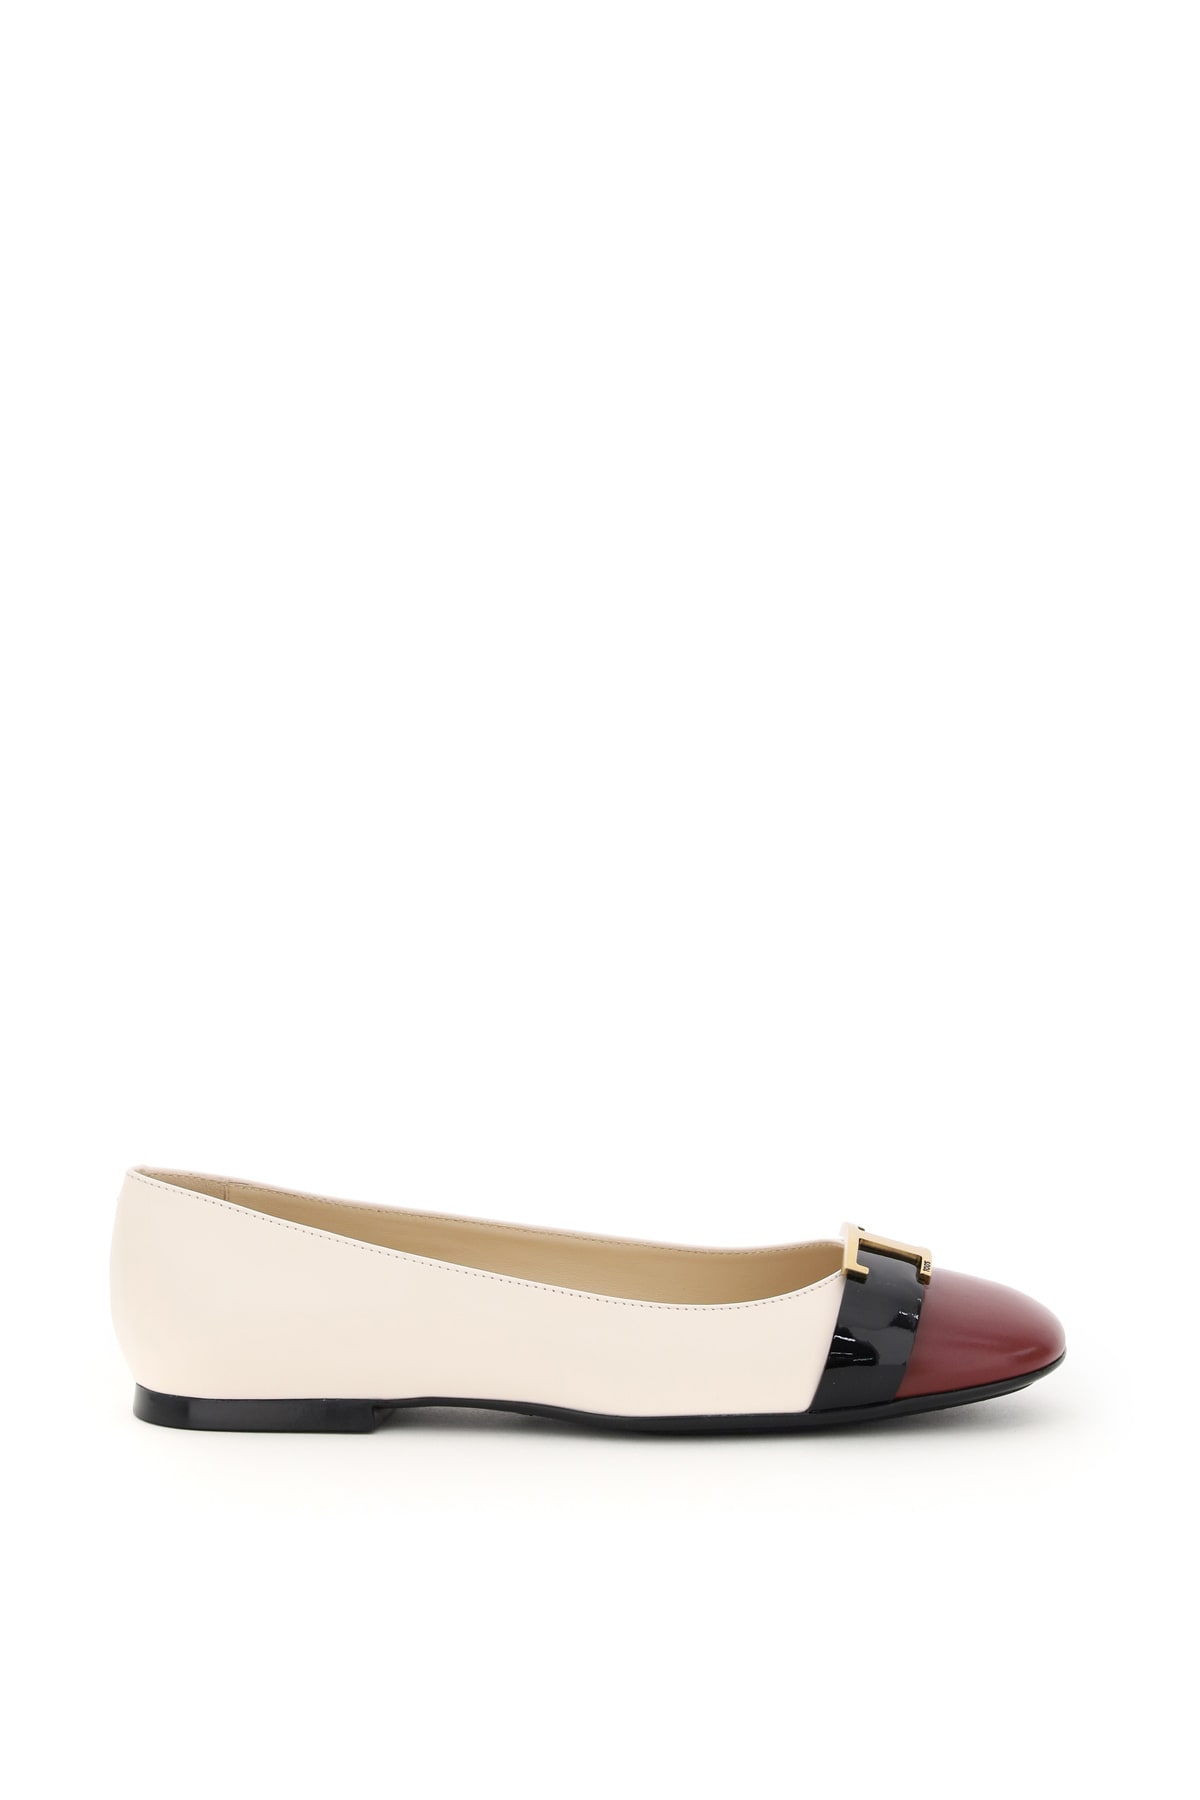 Tods T Timeless Multicolor Ballet Flats